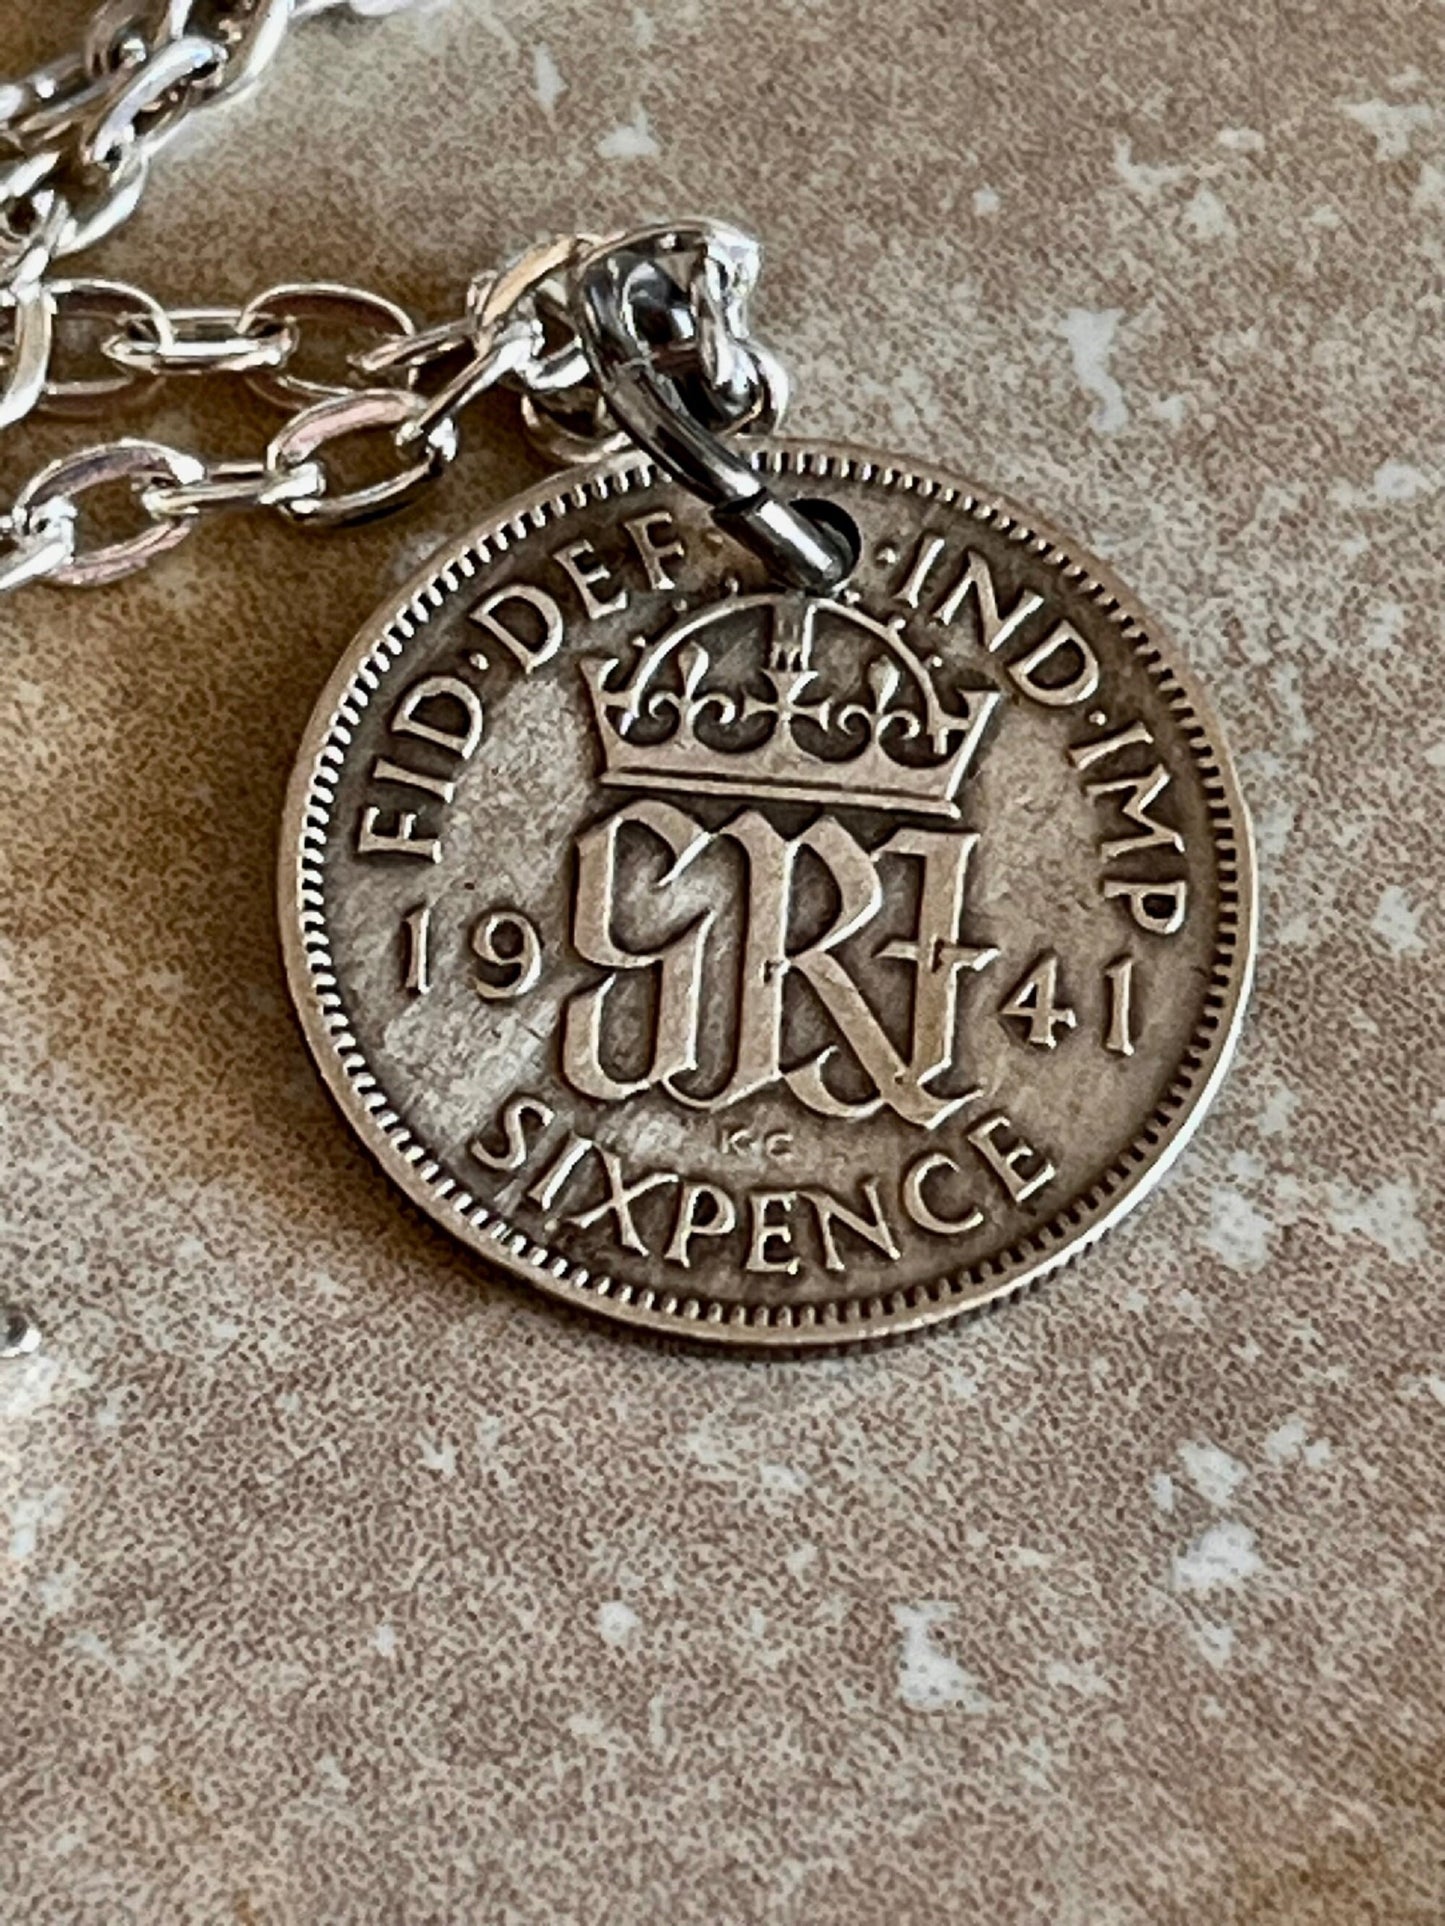 Britain Silver Pendant Coin Necklace 6 Pence Sixpence United Kingdom Personal Jewelry Gift Friend Charm For Him Her World Coin Collector